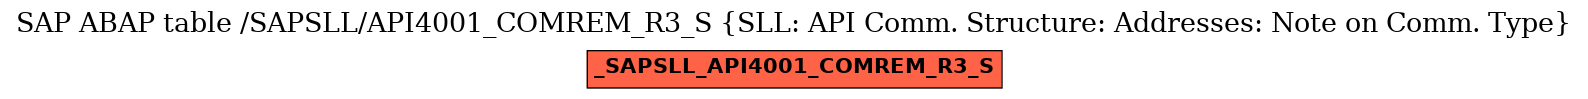 E-R Diagram for table /SAPSLL/API4001_COMREM_R3_S (SLL: API Comm. Structure: Addresses: Note on Comm. Type)